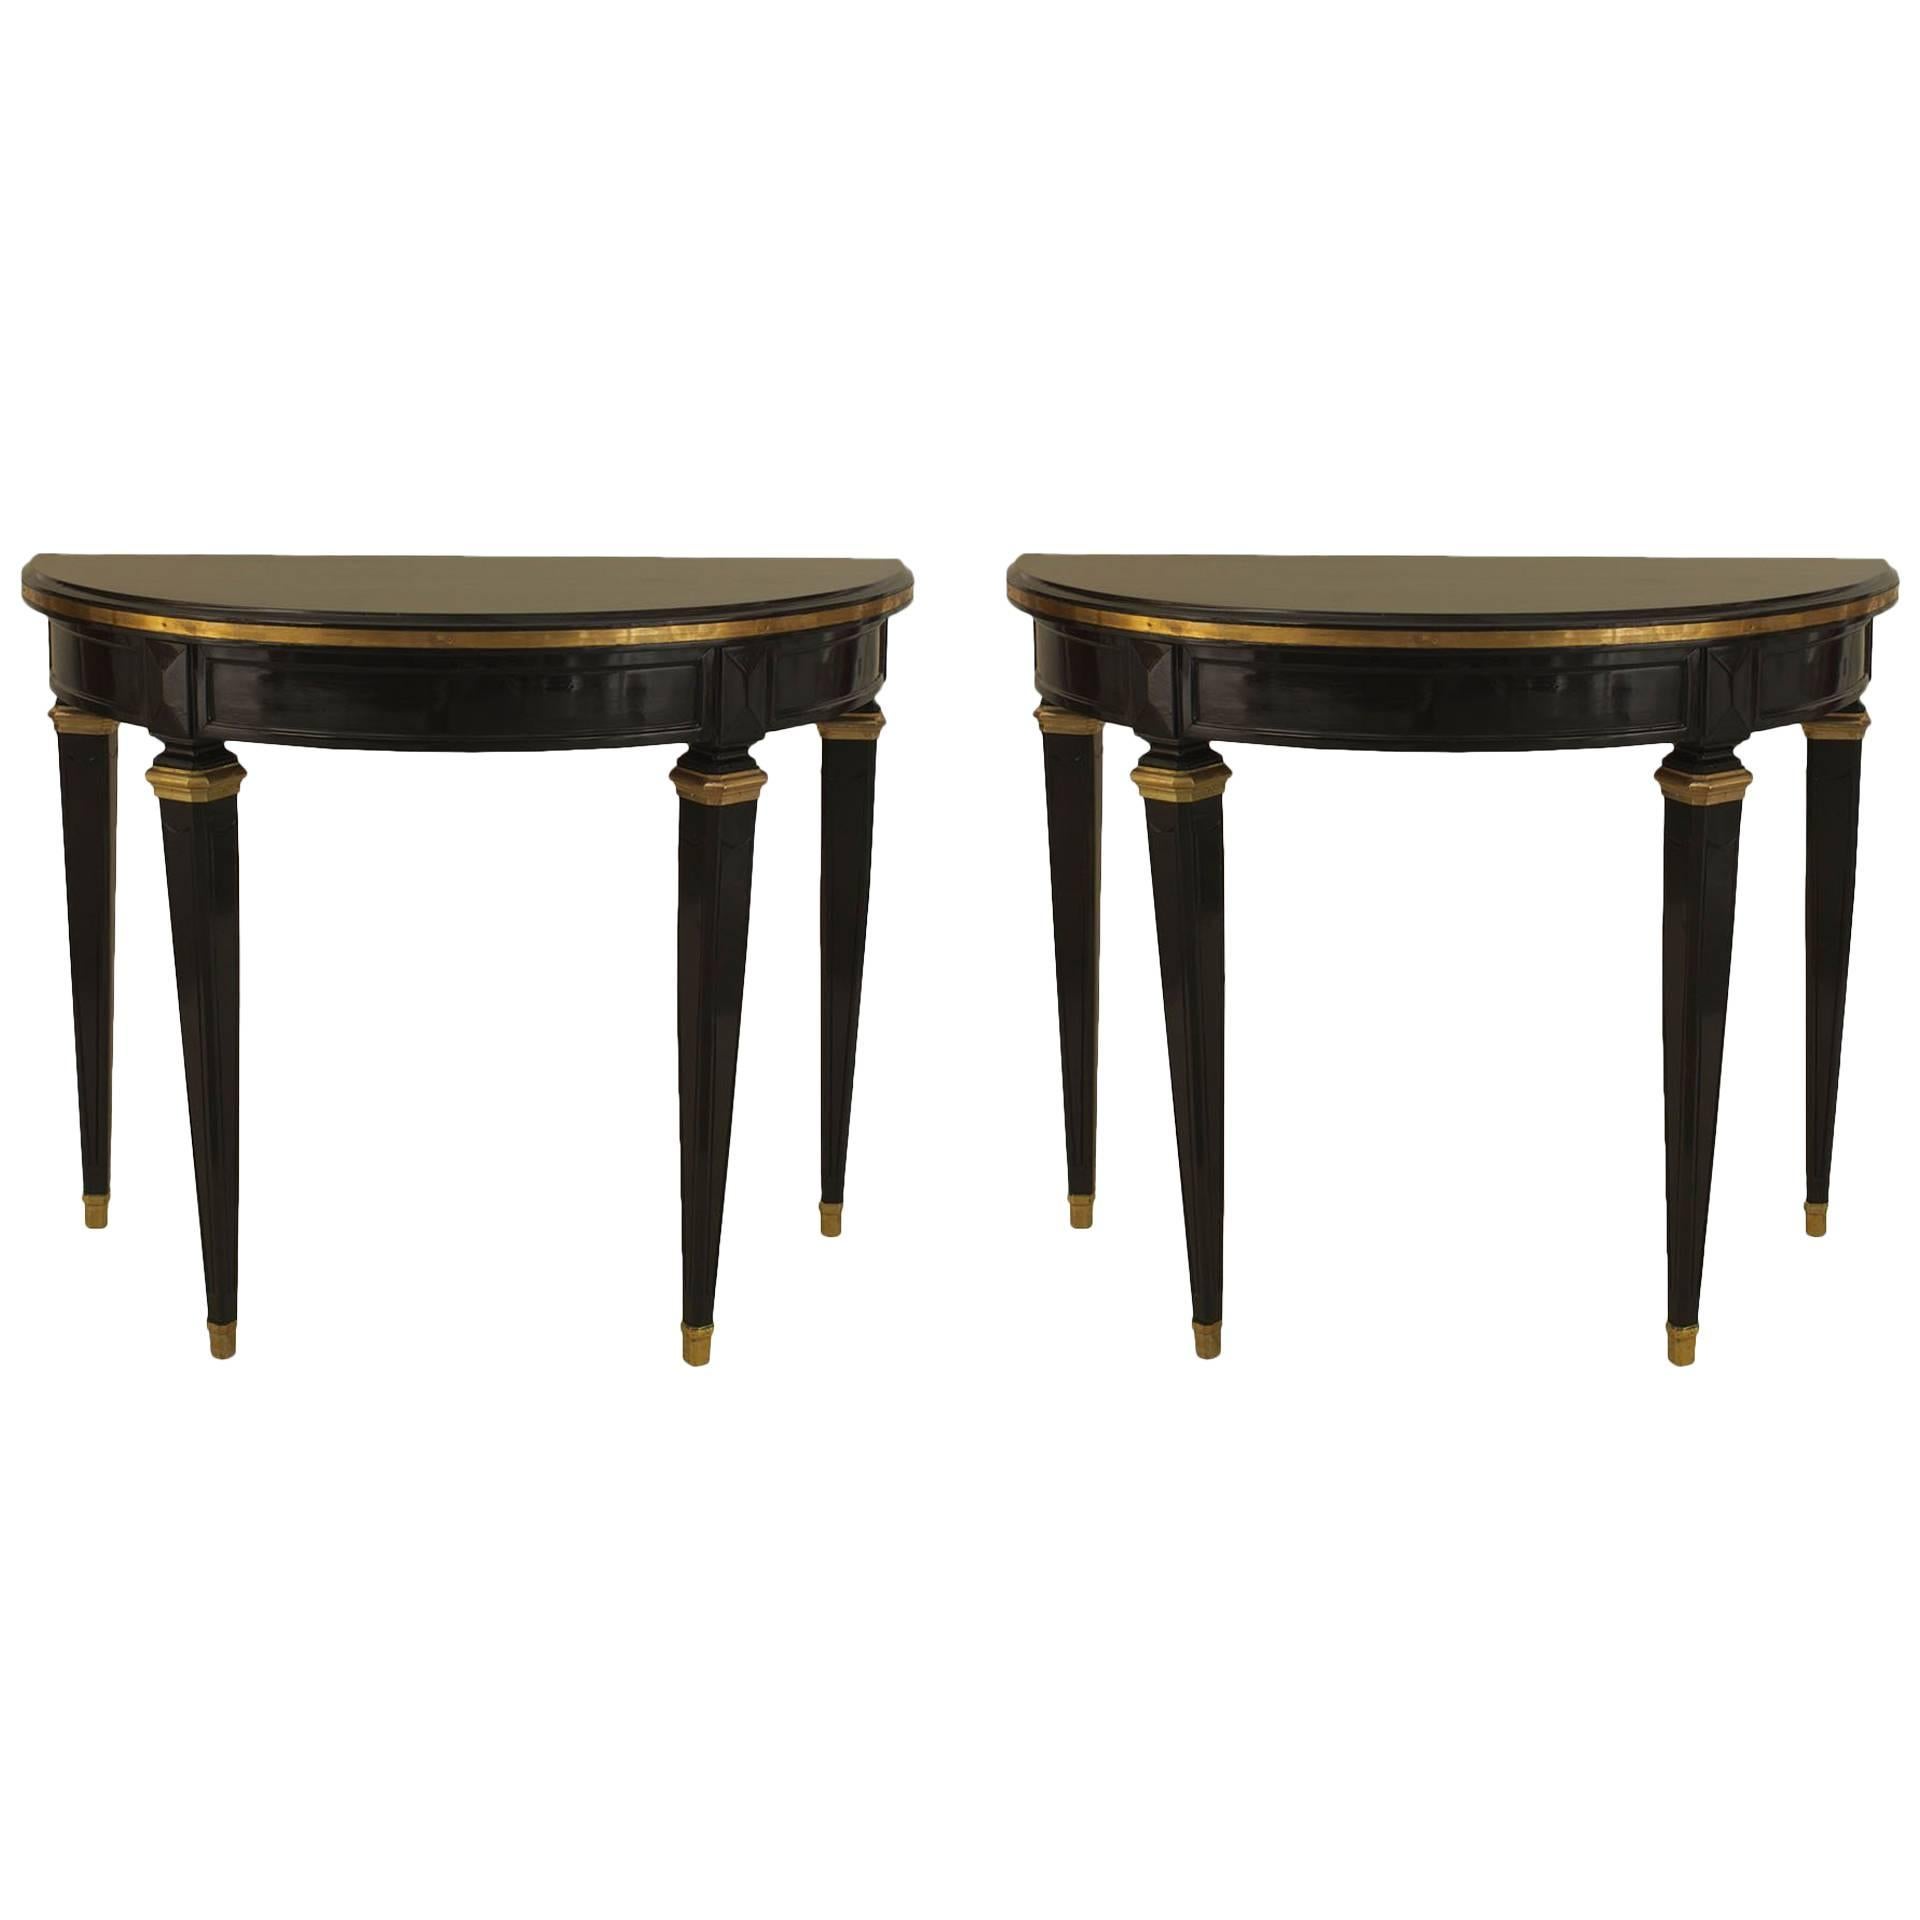 Pair of Jansen French Louis XVI Style Ebonized Demilune Console Tables For Sale